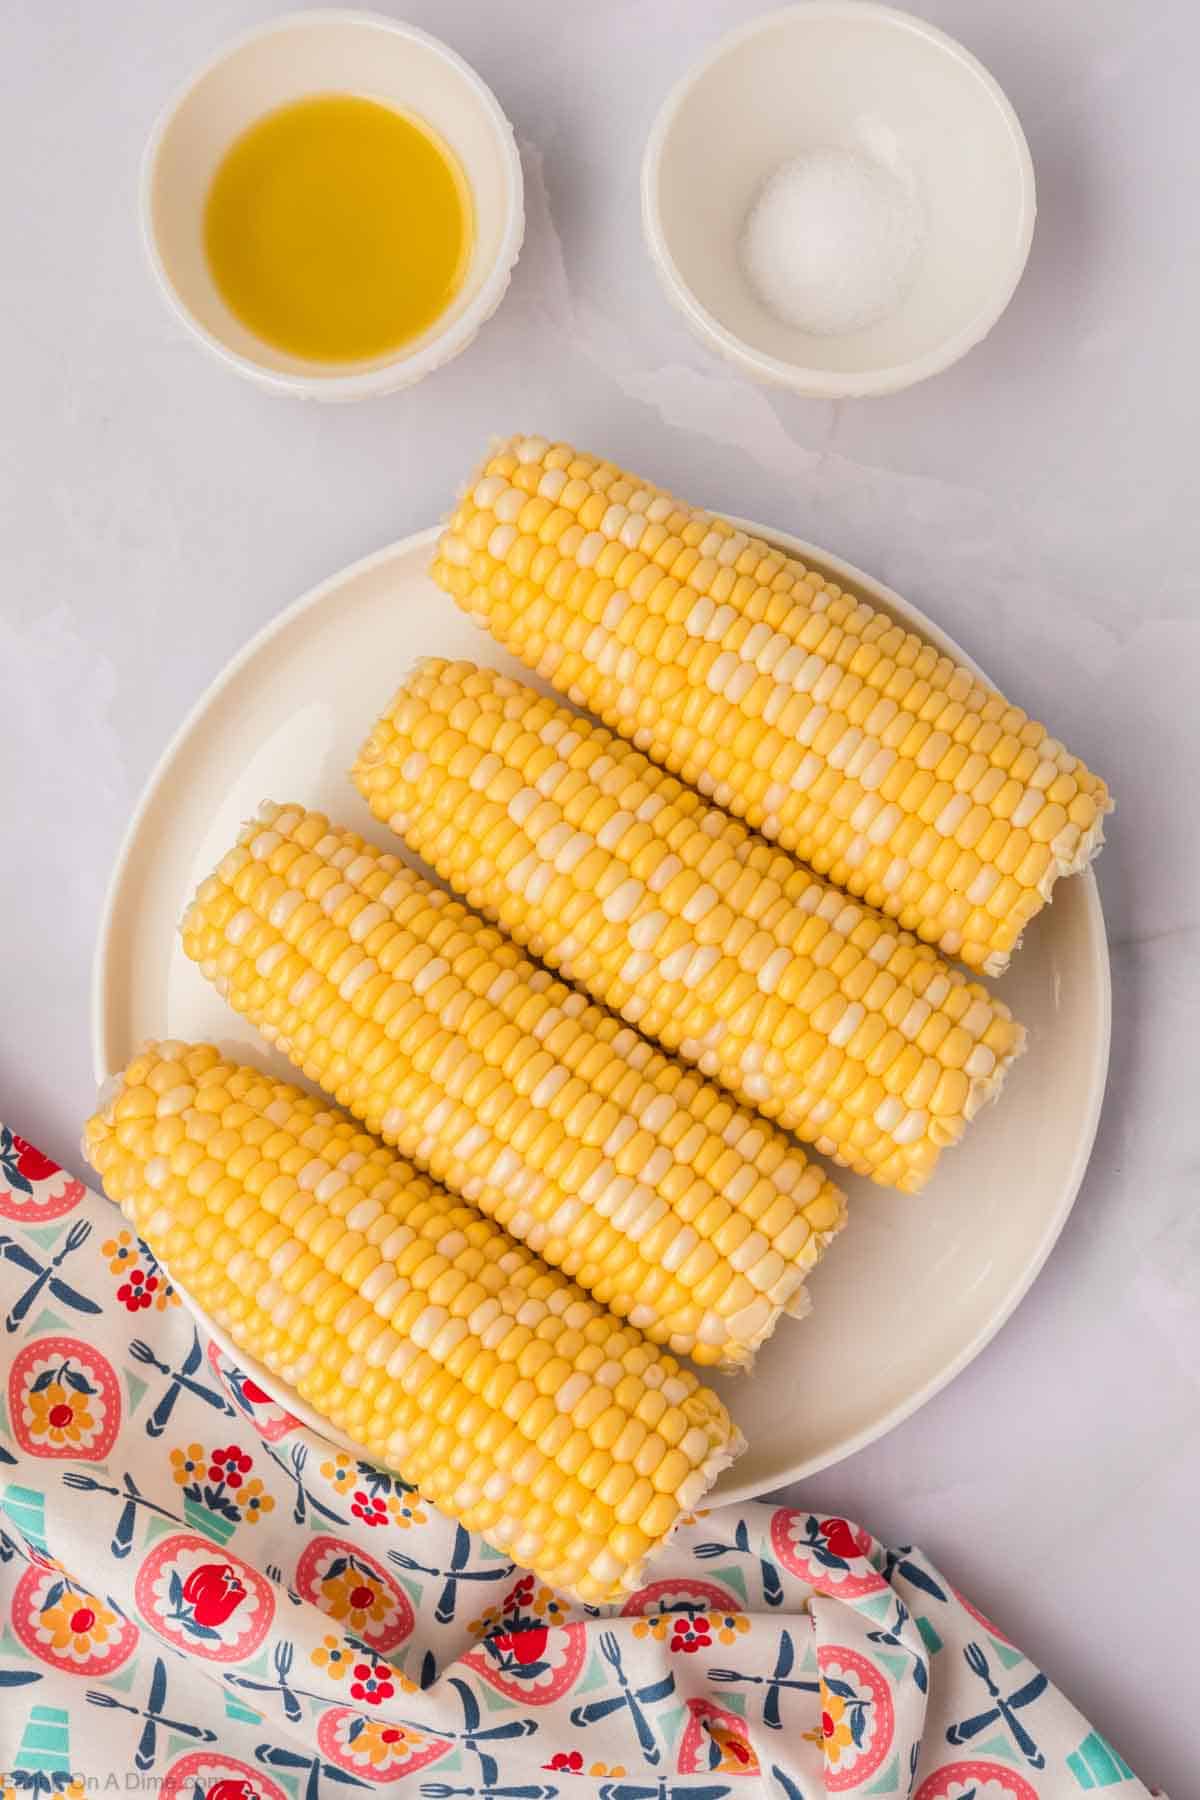 A plate of five corn on the cobs is placed on a table with a colorful floral-patterned cloth beside it. Near the plate, there are two small bowls, one containing oil and the other containing salt—perfect for seasoning your Air Fryer Corn on the Cob.